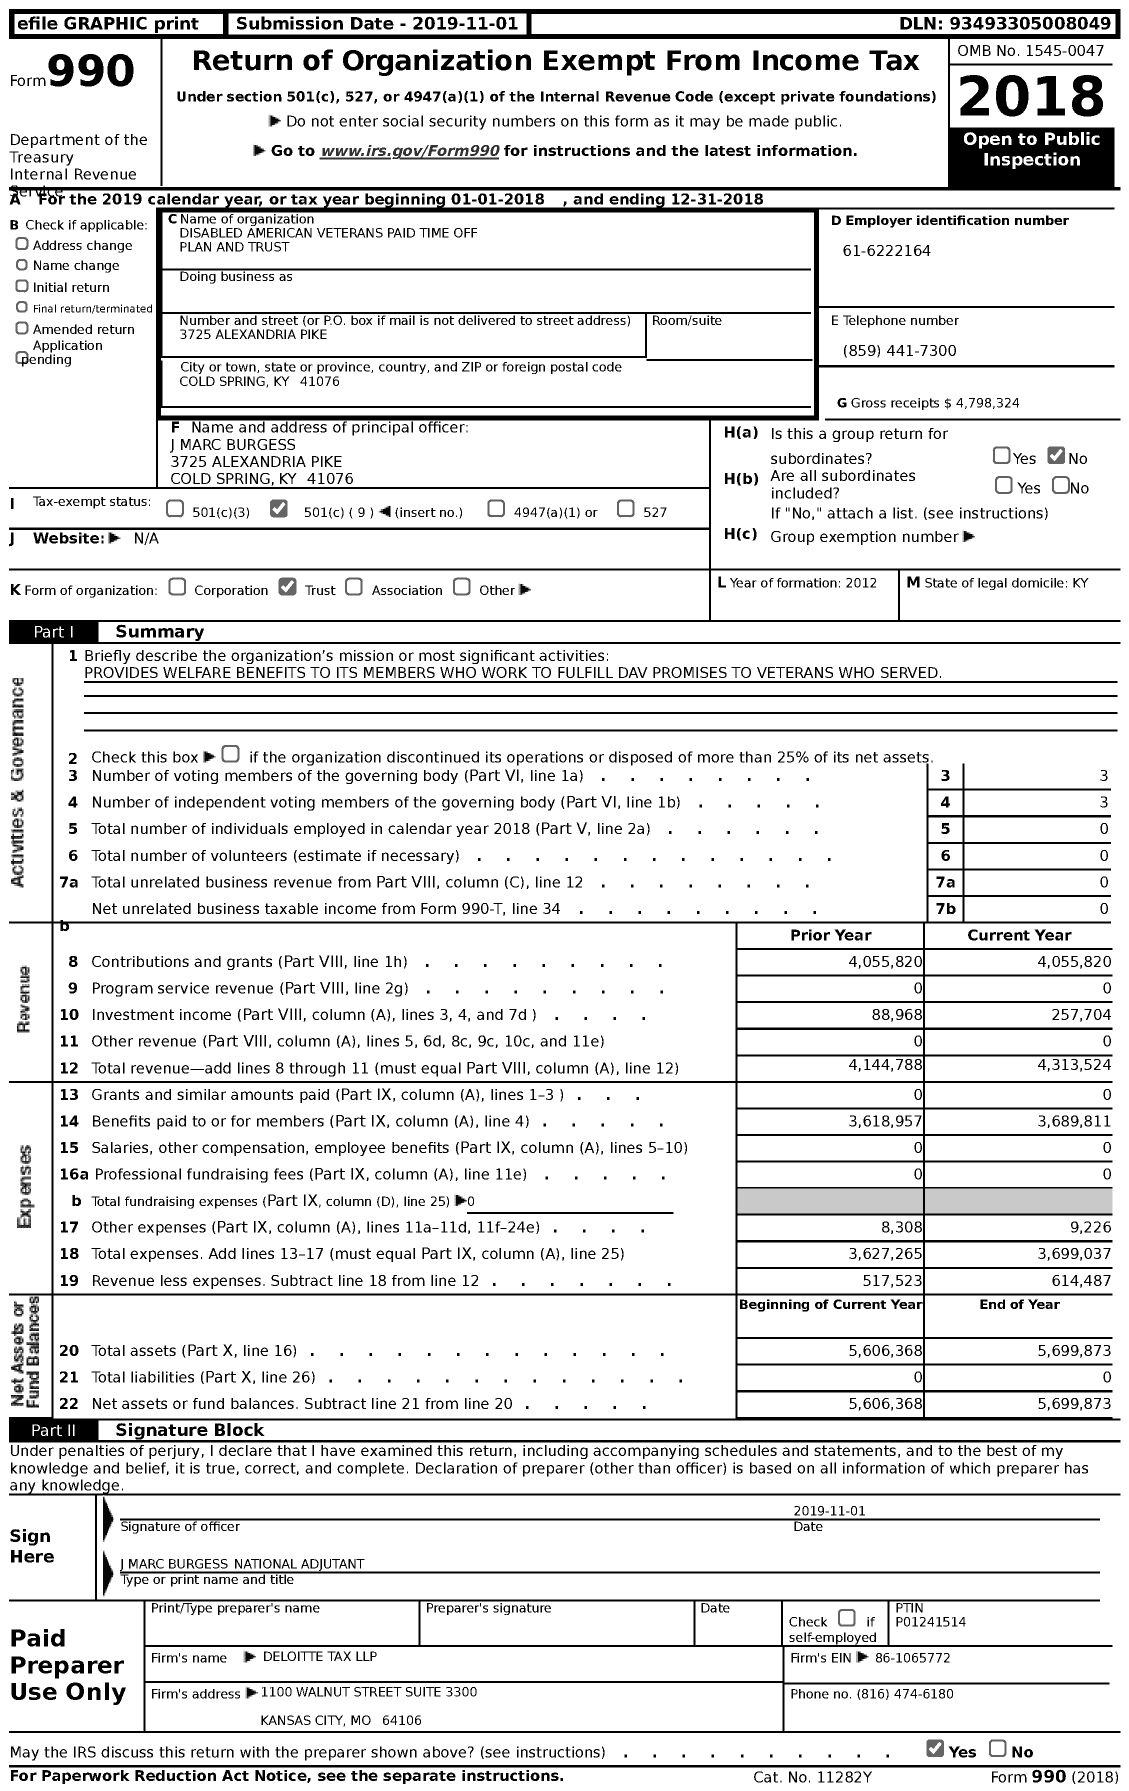 Image of first page of 2018 Form 990 for Disabled American Veterans Paid Time Off PLAN AND TRUST